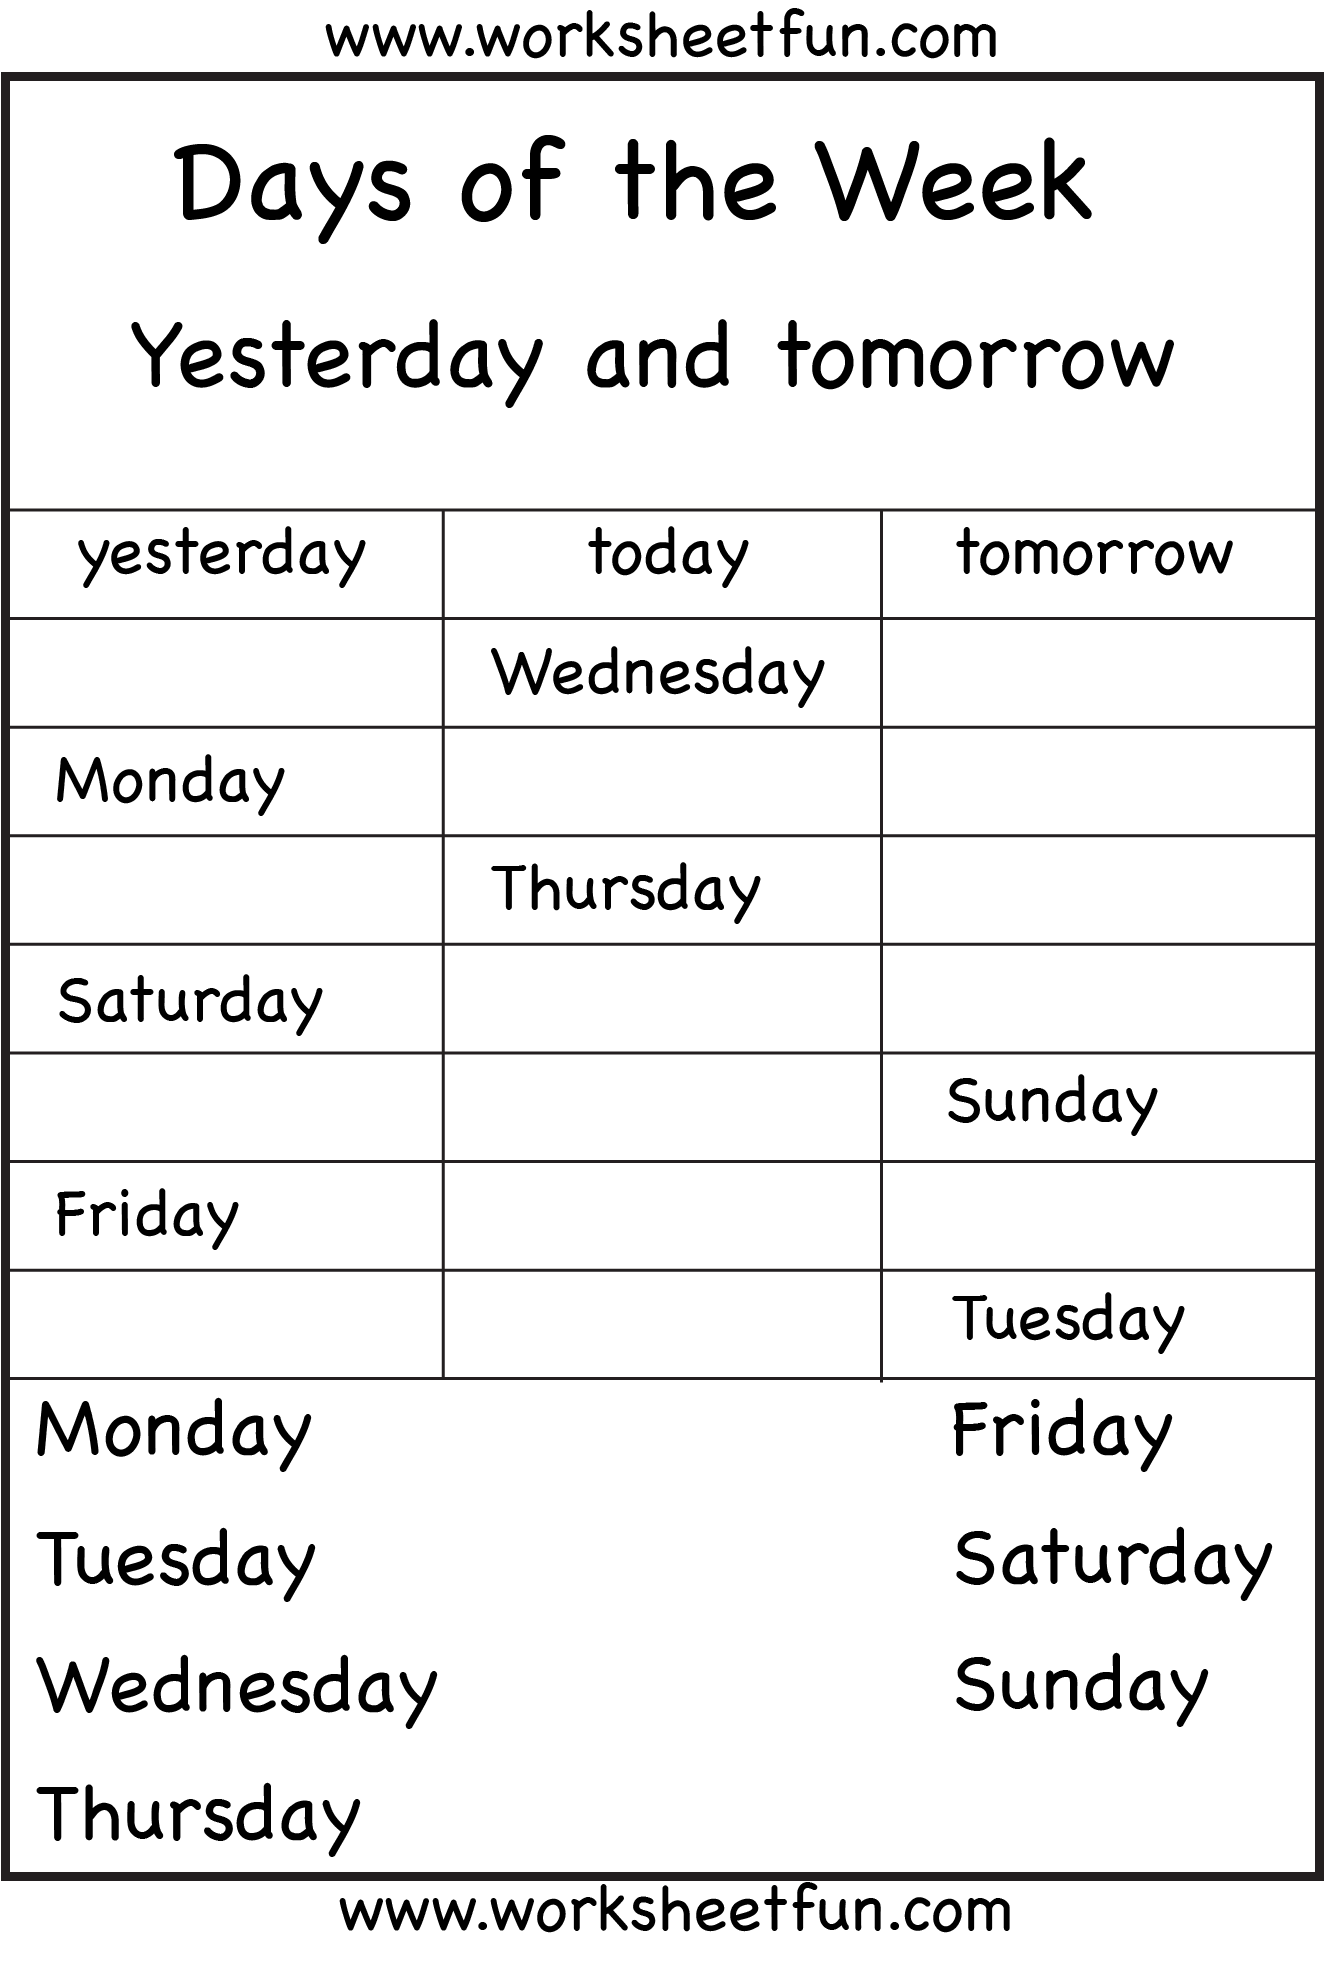 Days of the Week Yesterday and Tomorrow 6 Worksheets / FREE